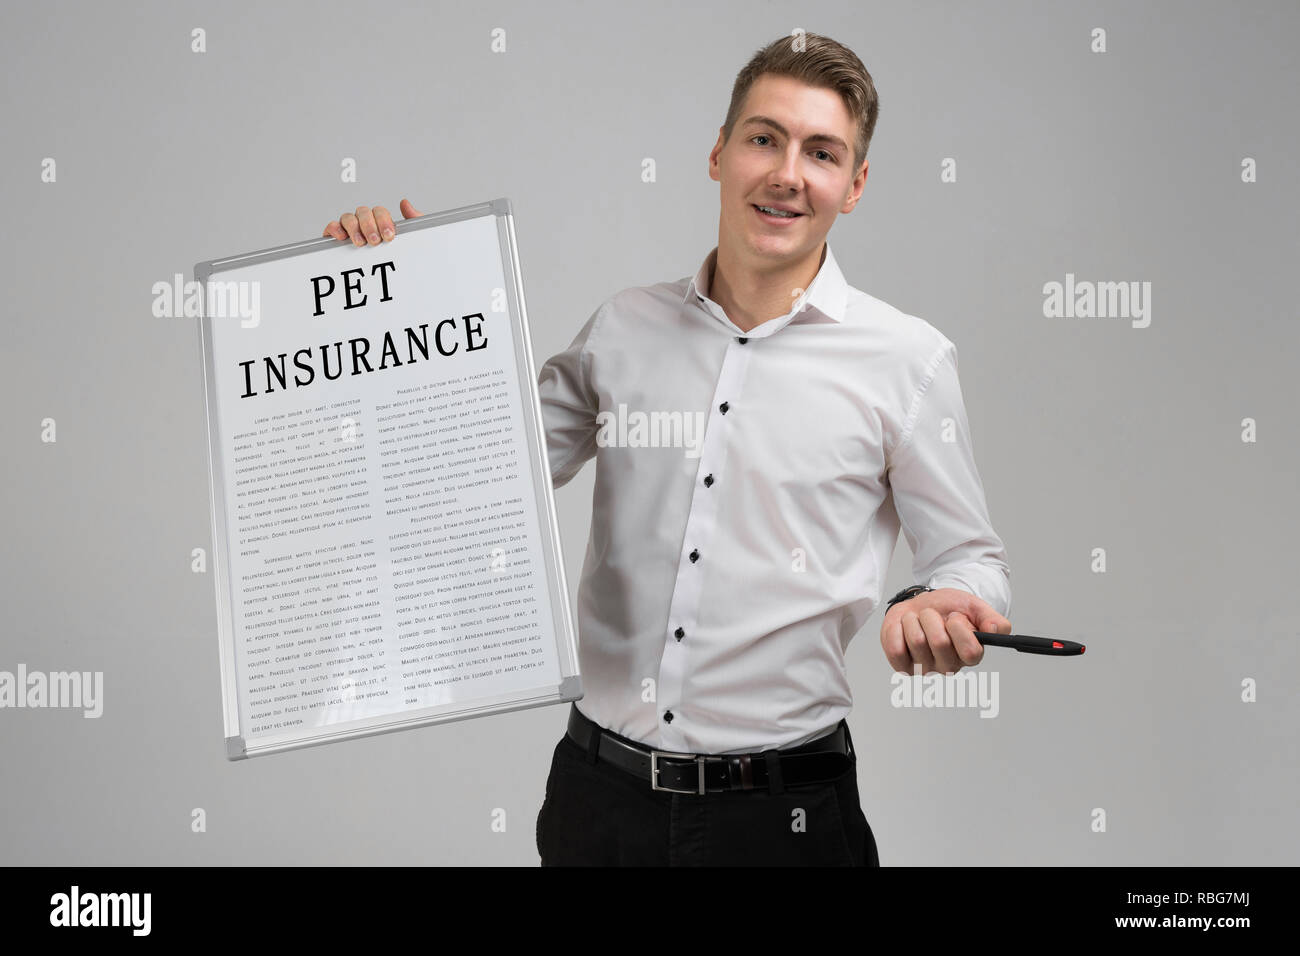 Young man holding poster with pet insurance isolated on light background Stock Photo